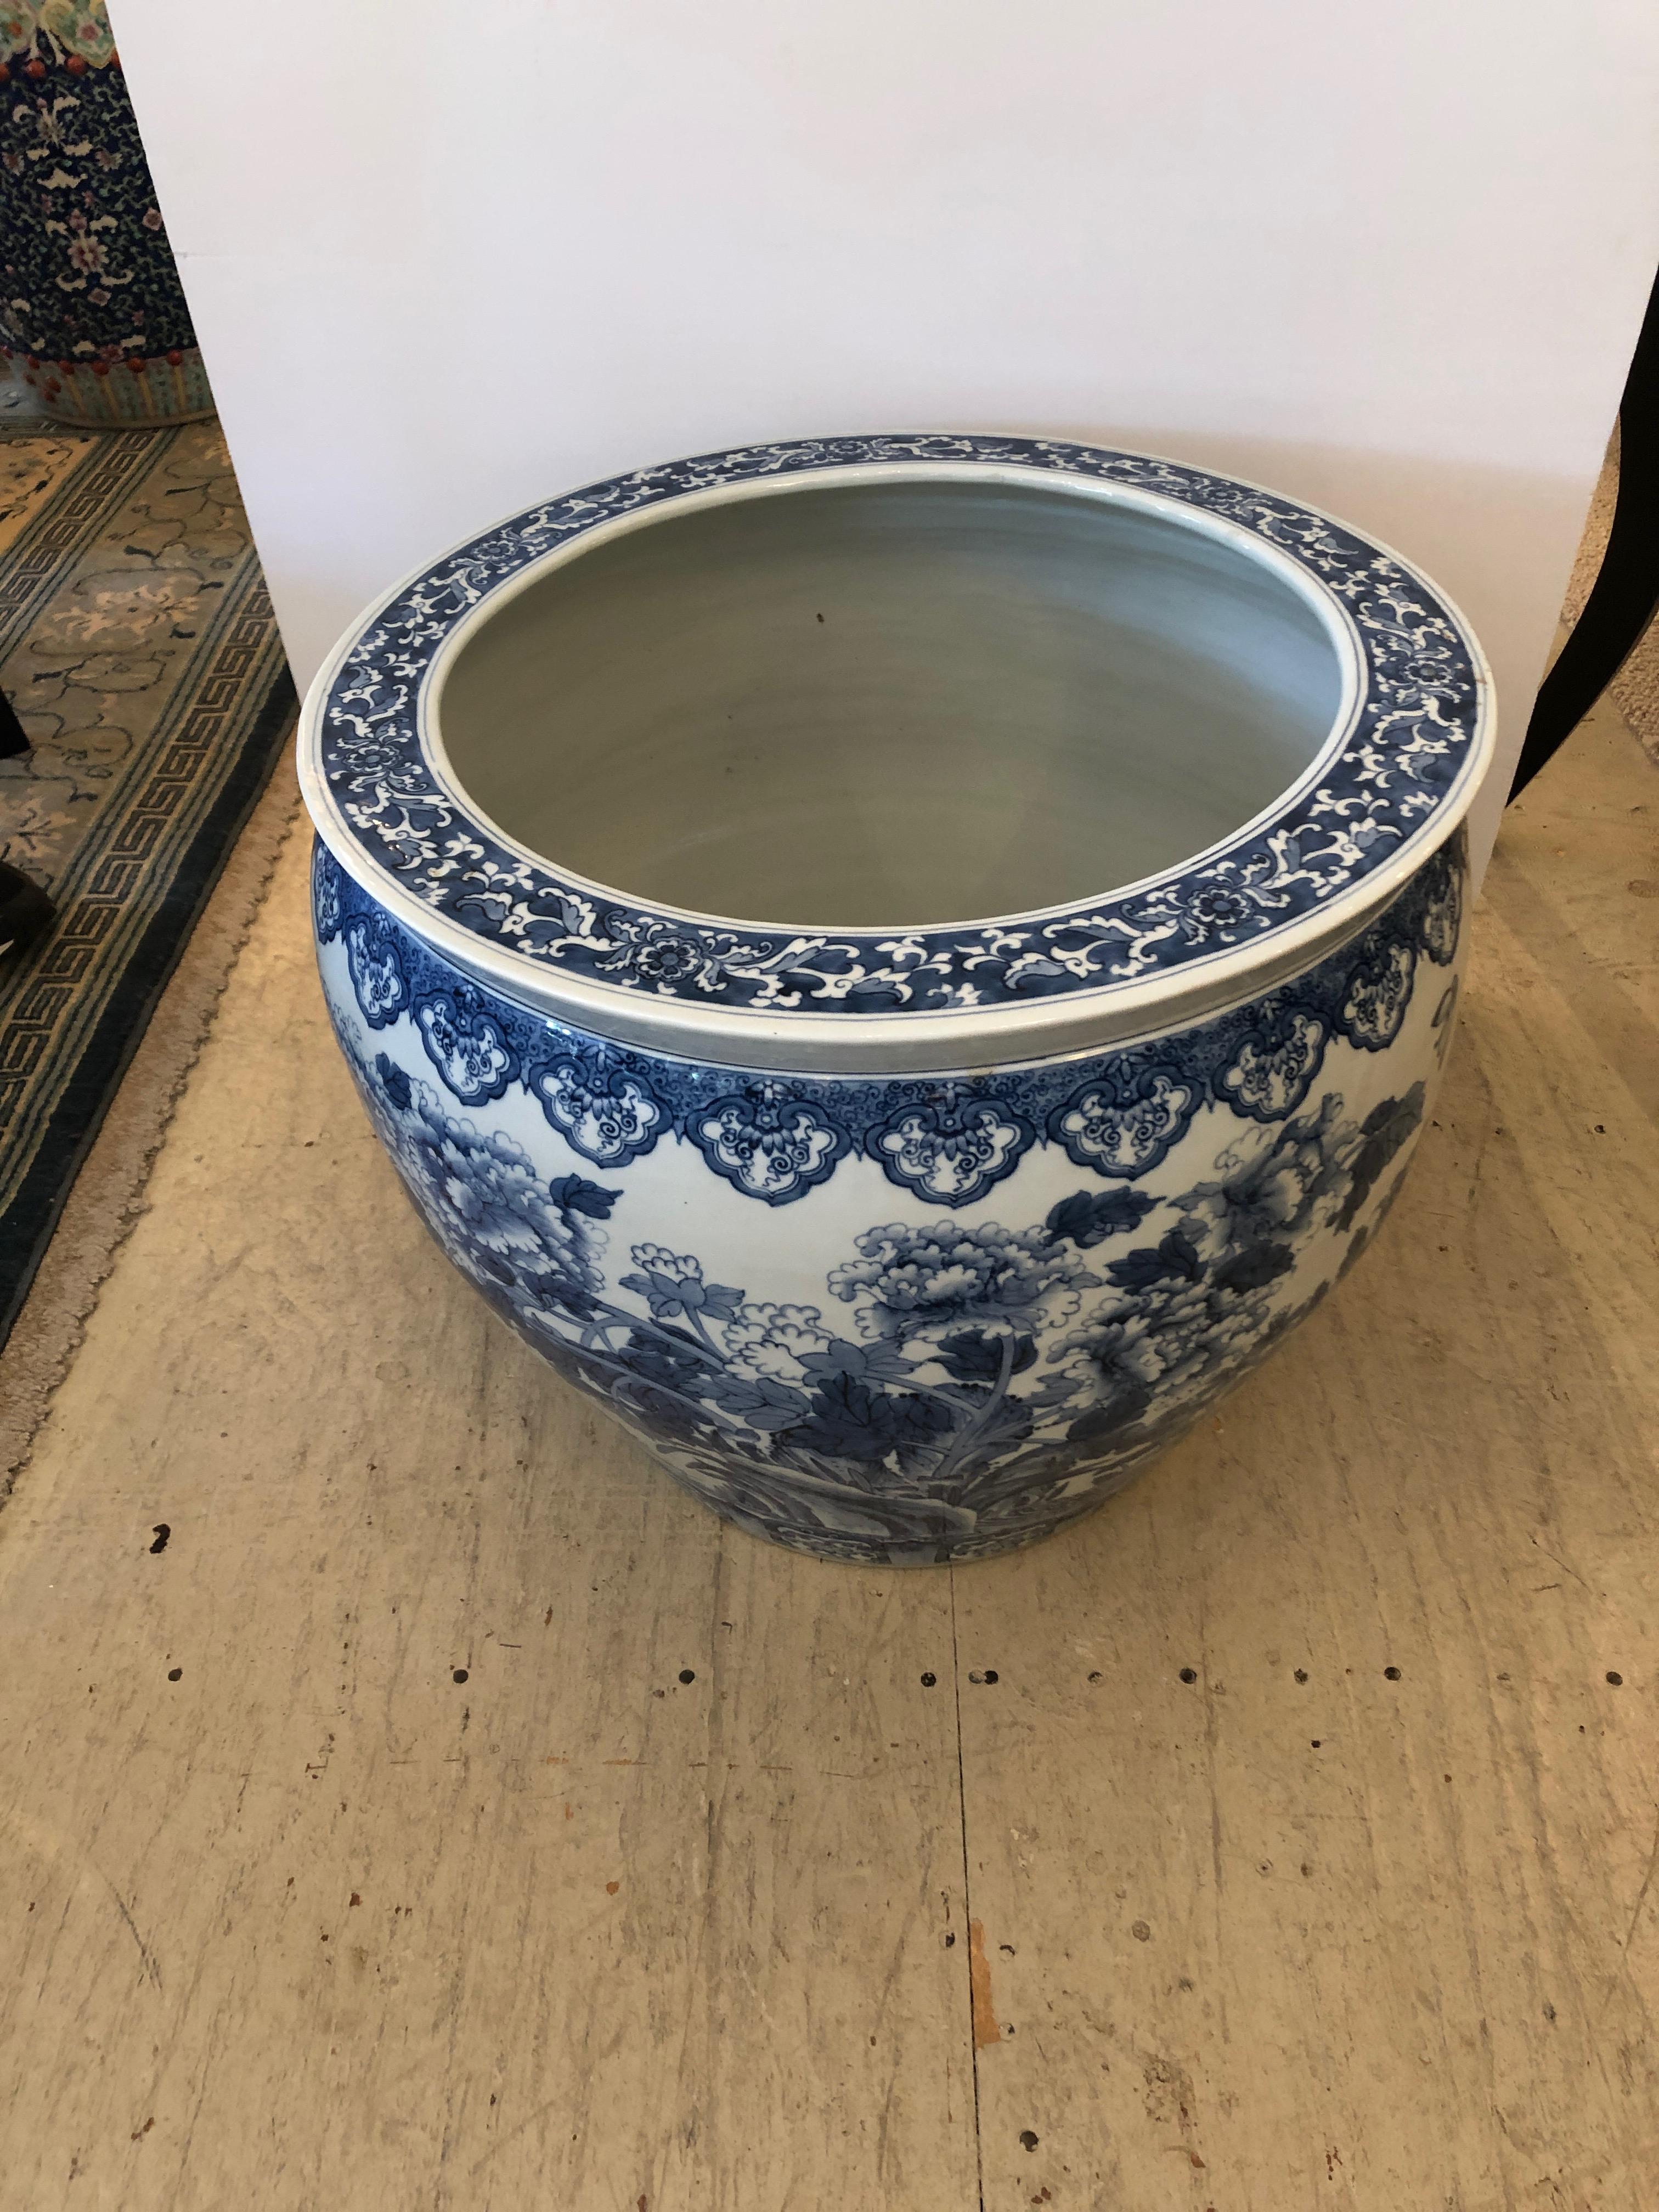 A big gutsy heavy Chinese ceramic planter having beautiful blue and white decoration. Perfect size to use as a base for a coffee table if you top it with a round piece of glass.